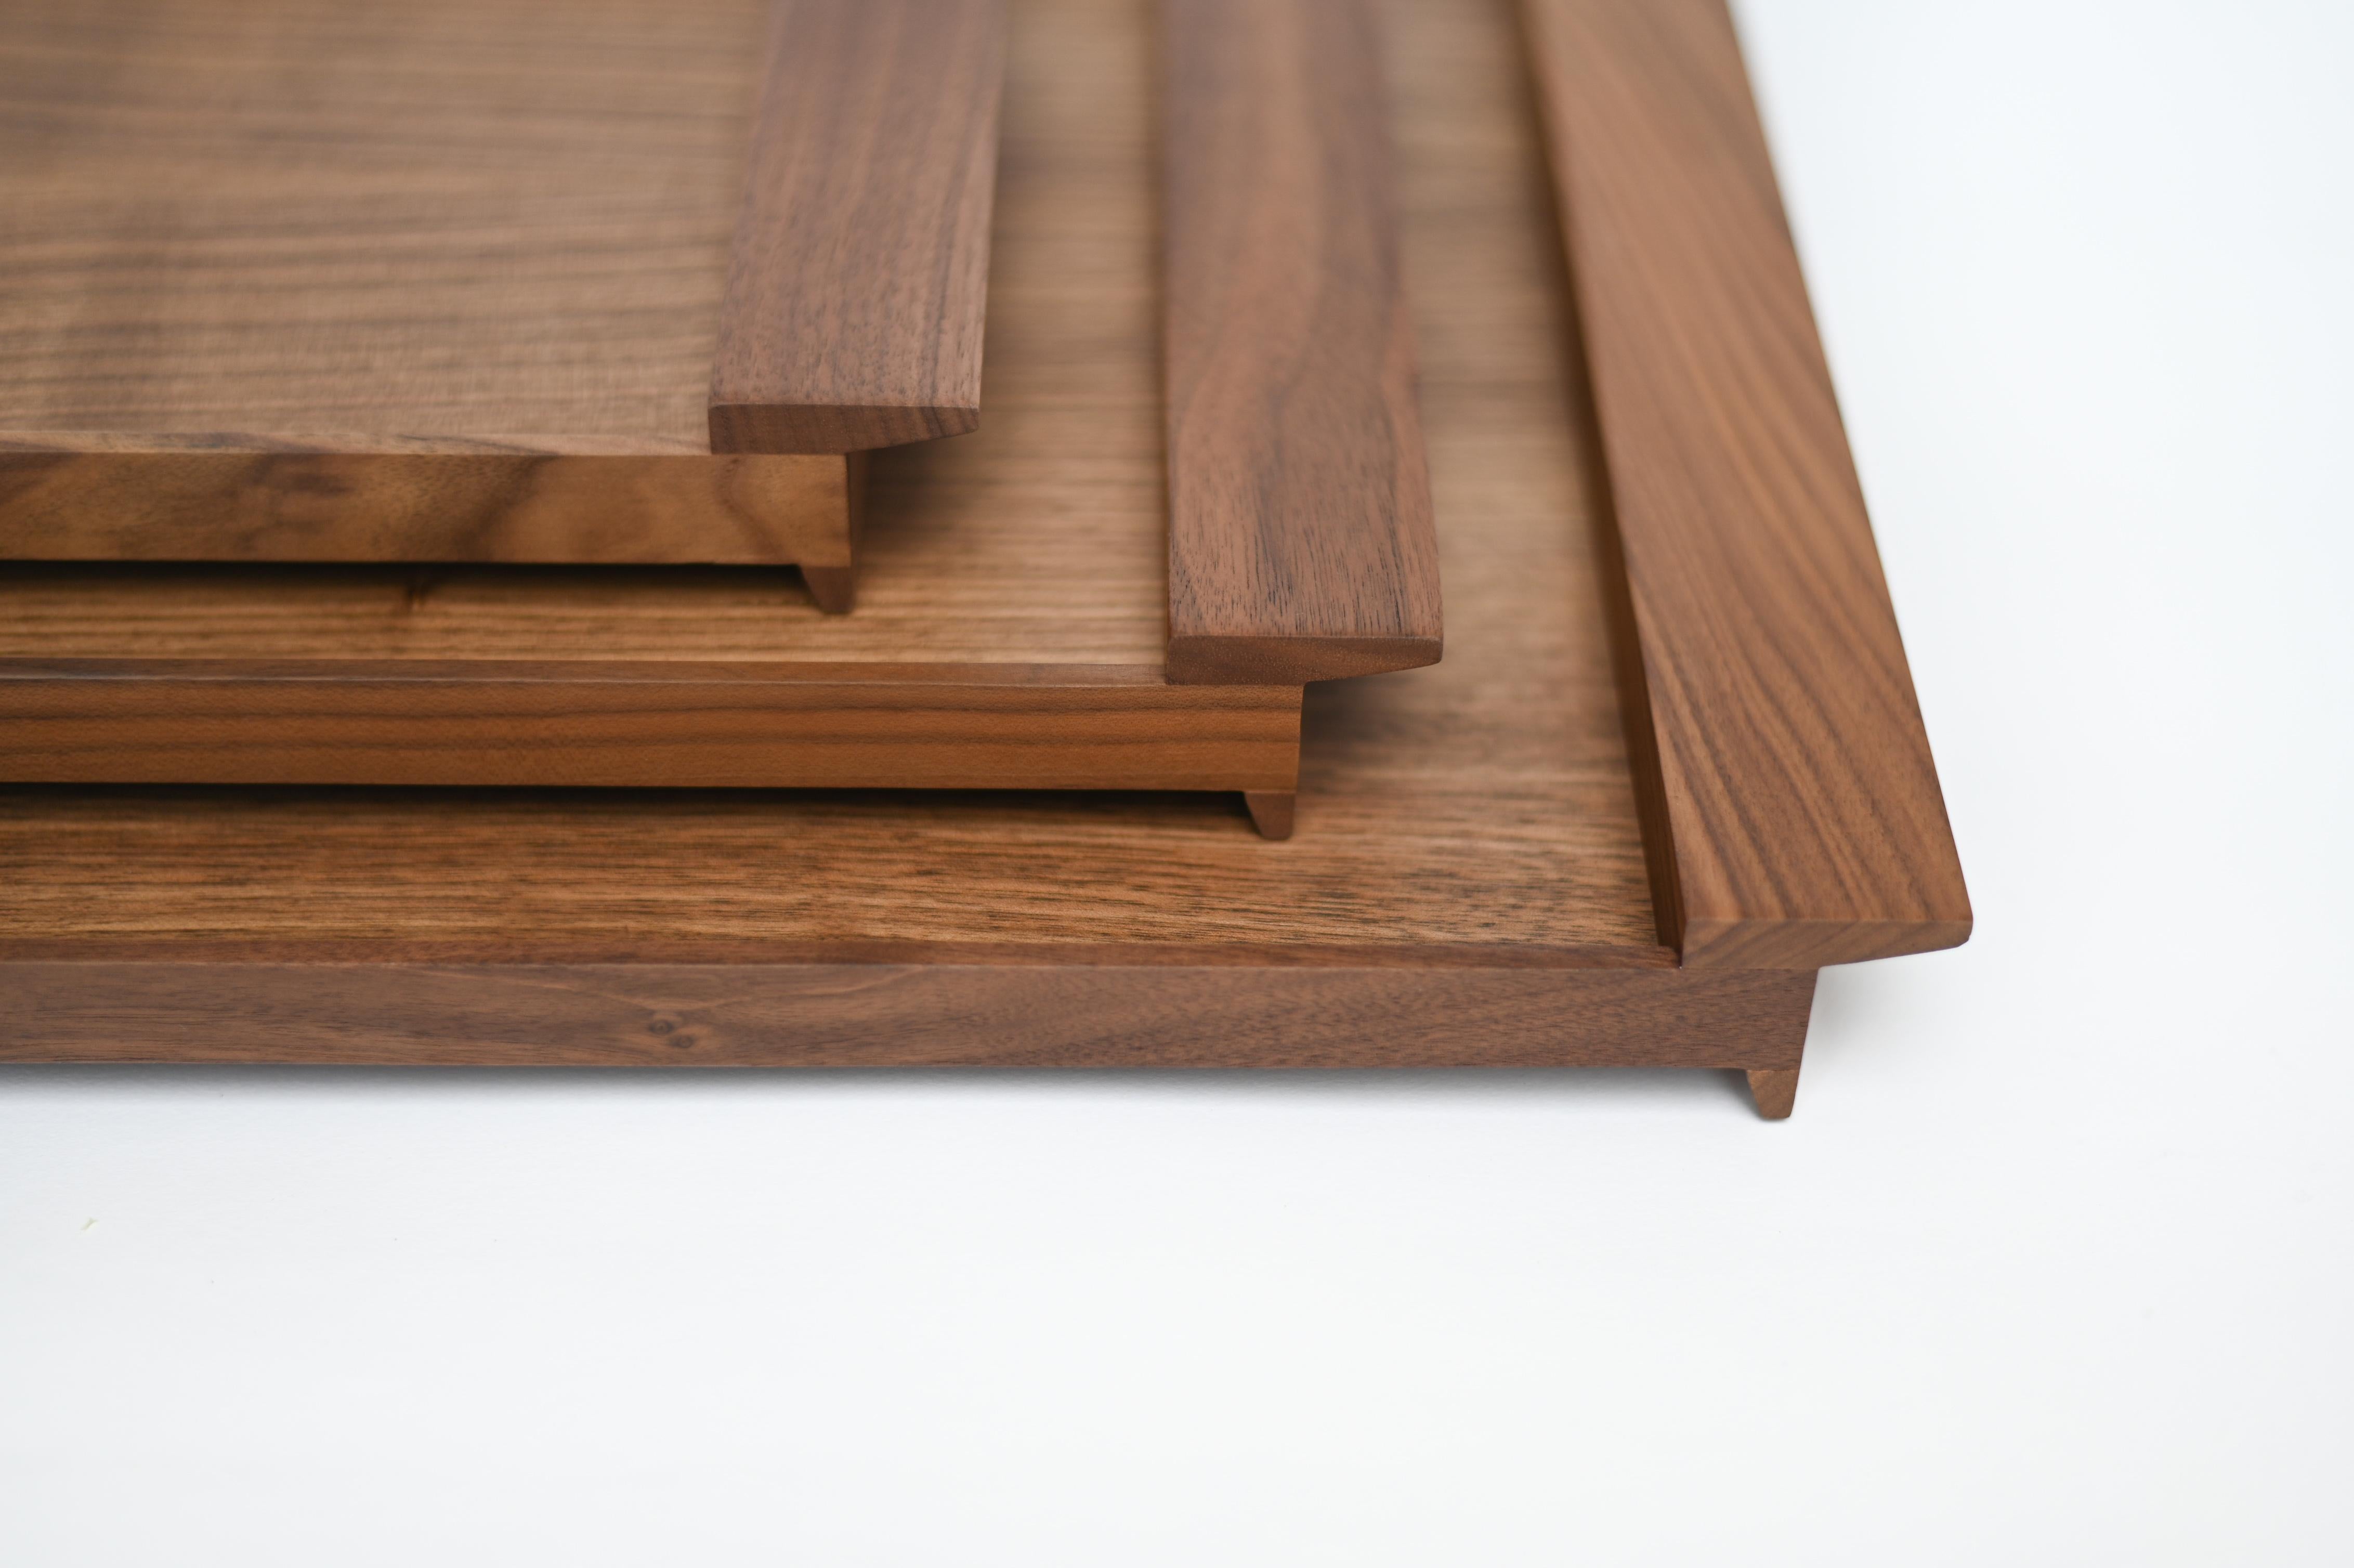 These wooden trays in maple or walnut are all about joinery details. The design carries a Portuguese signature, as well as Scandinavian and Japanese influences. Ponte means bridge in Portuguese – a set of trays that support, highlight and transport